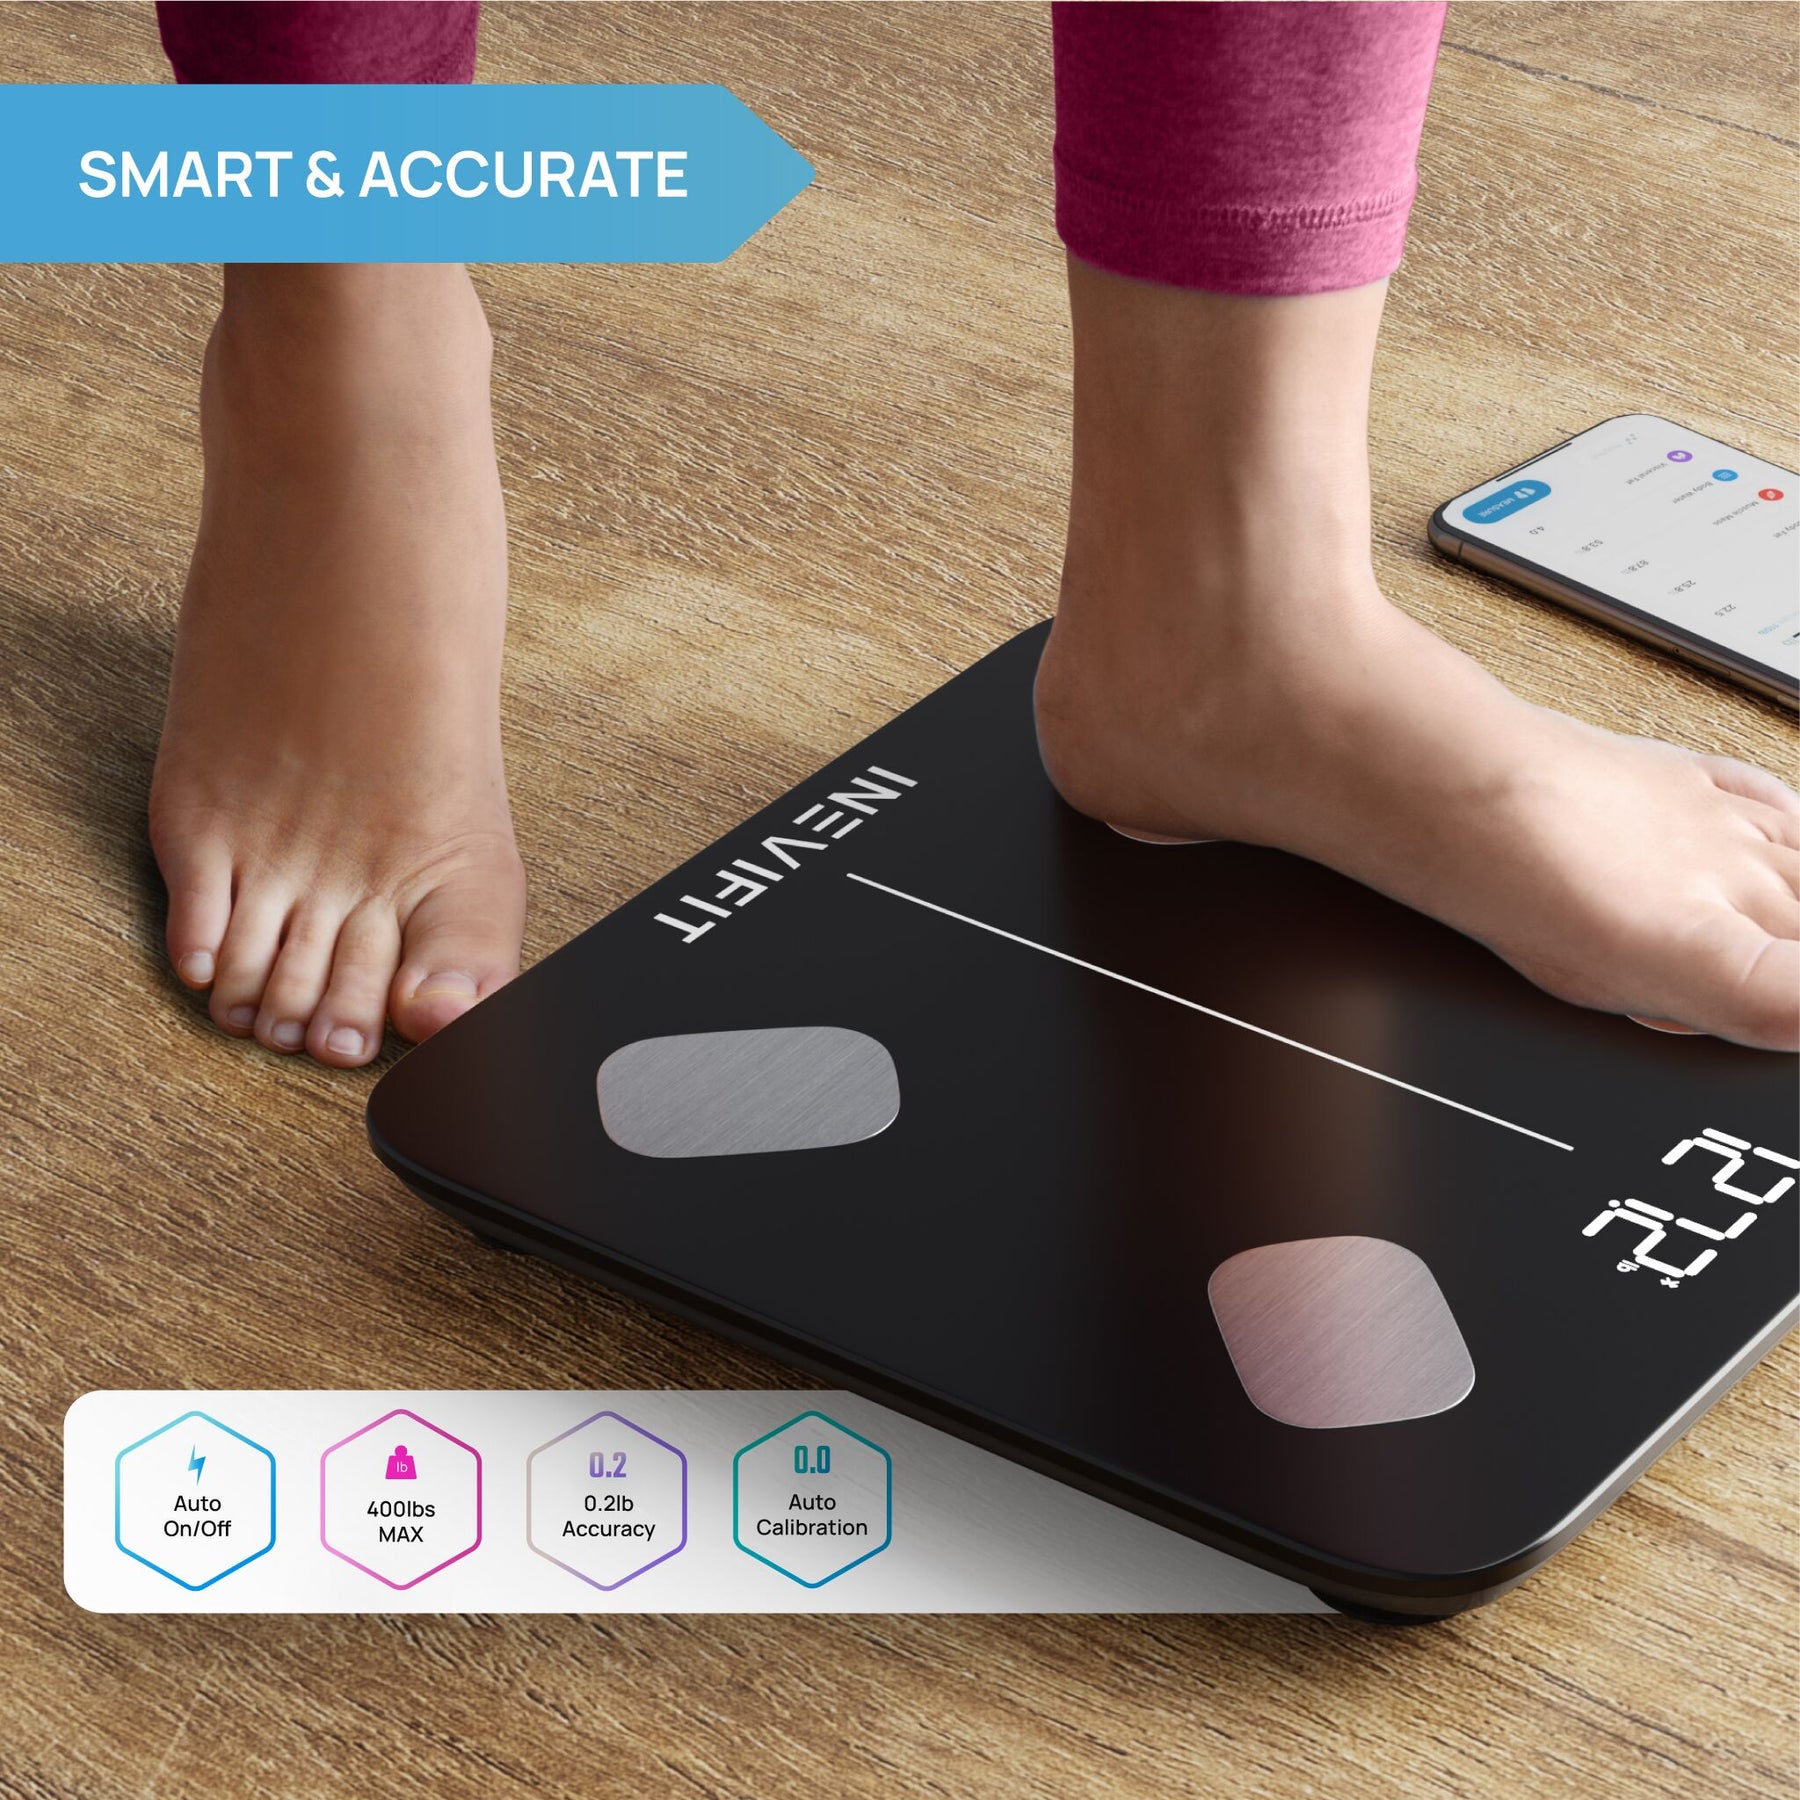 INEVIFIT Premium Bathroom Scale Highly Accurate Digital Bathroom Body Scale Precisely Measures Weight Up to 400 lbs